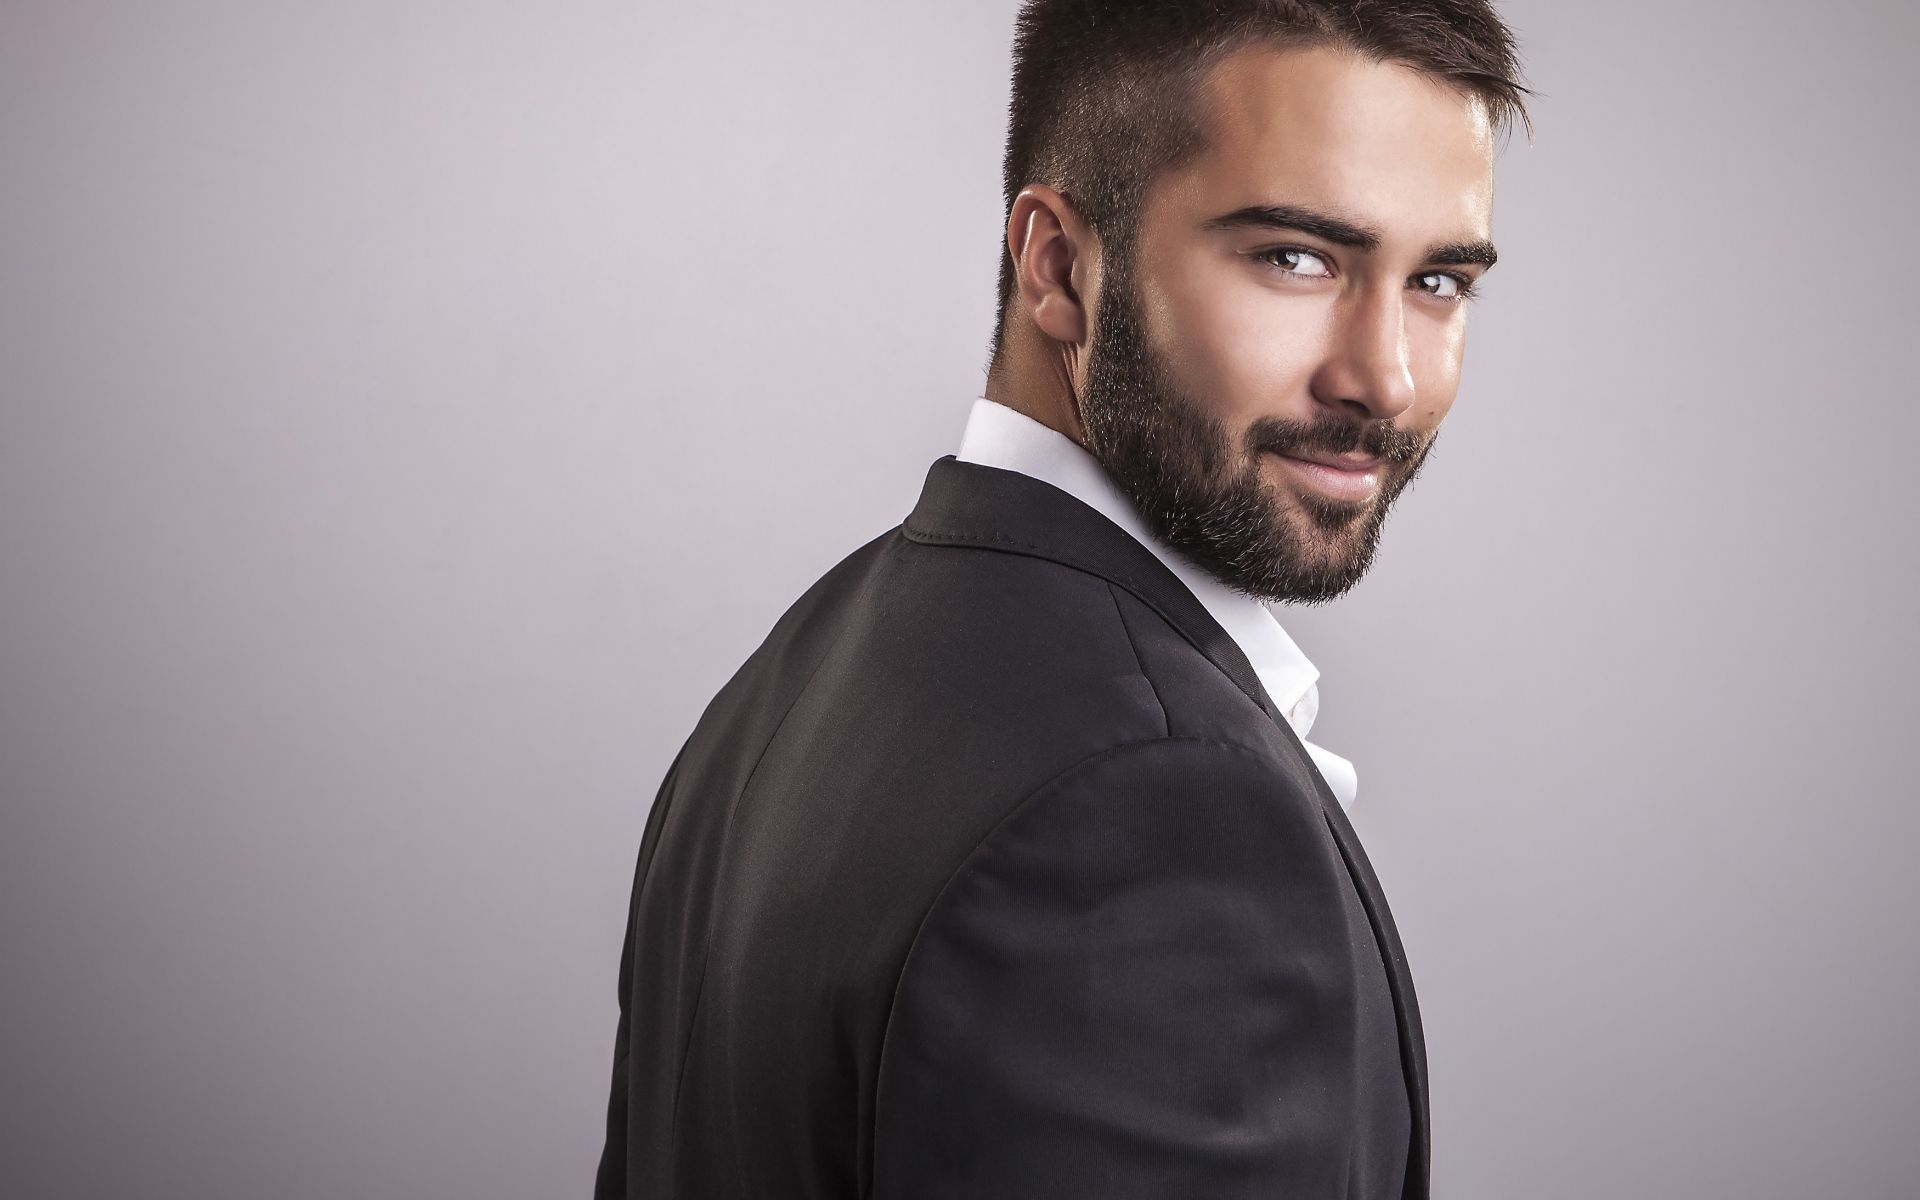 Handsome male model with a beard on gray background Desktop